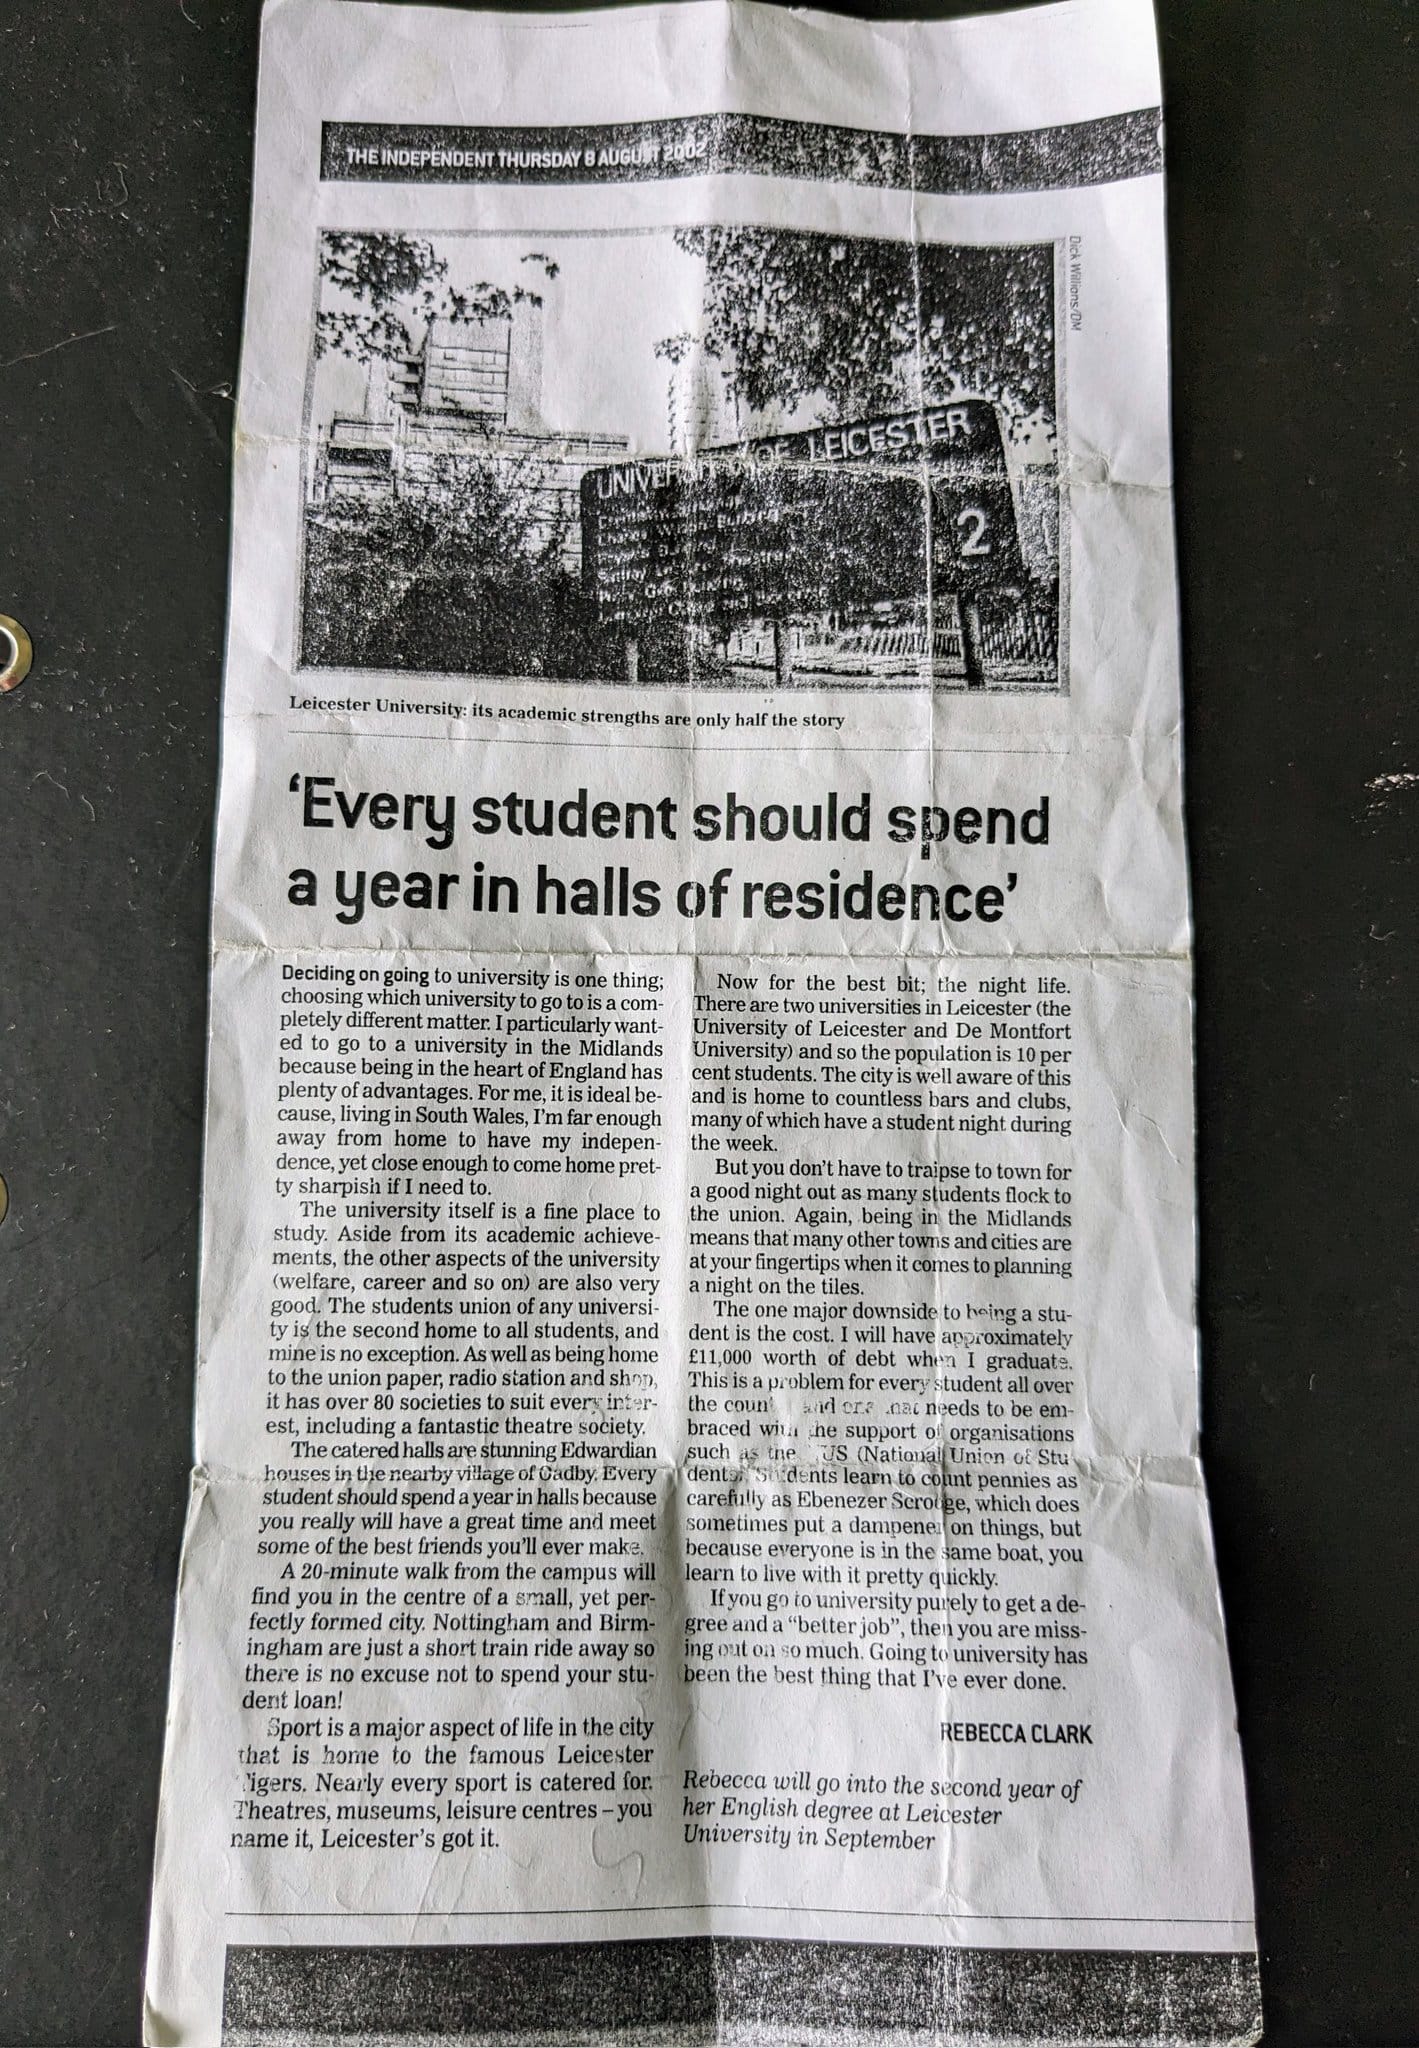 The Independent article titled 'Every student should spend a year in halls of residence'